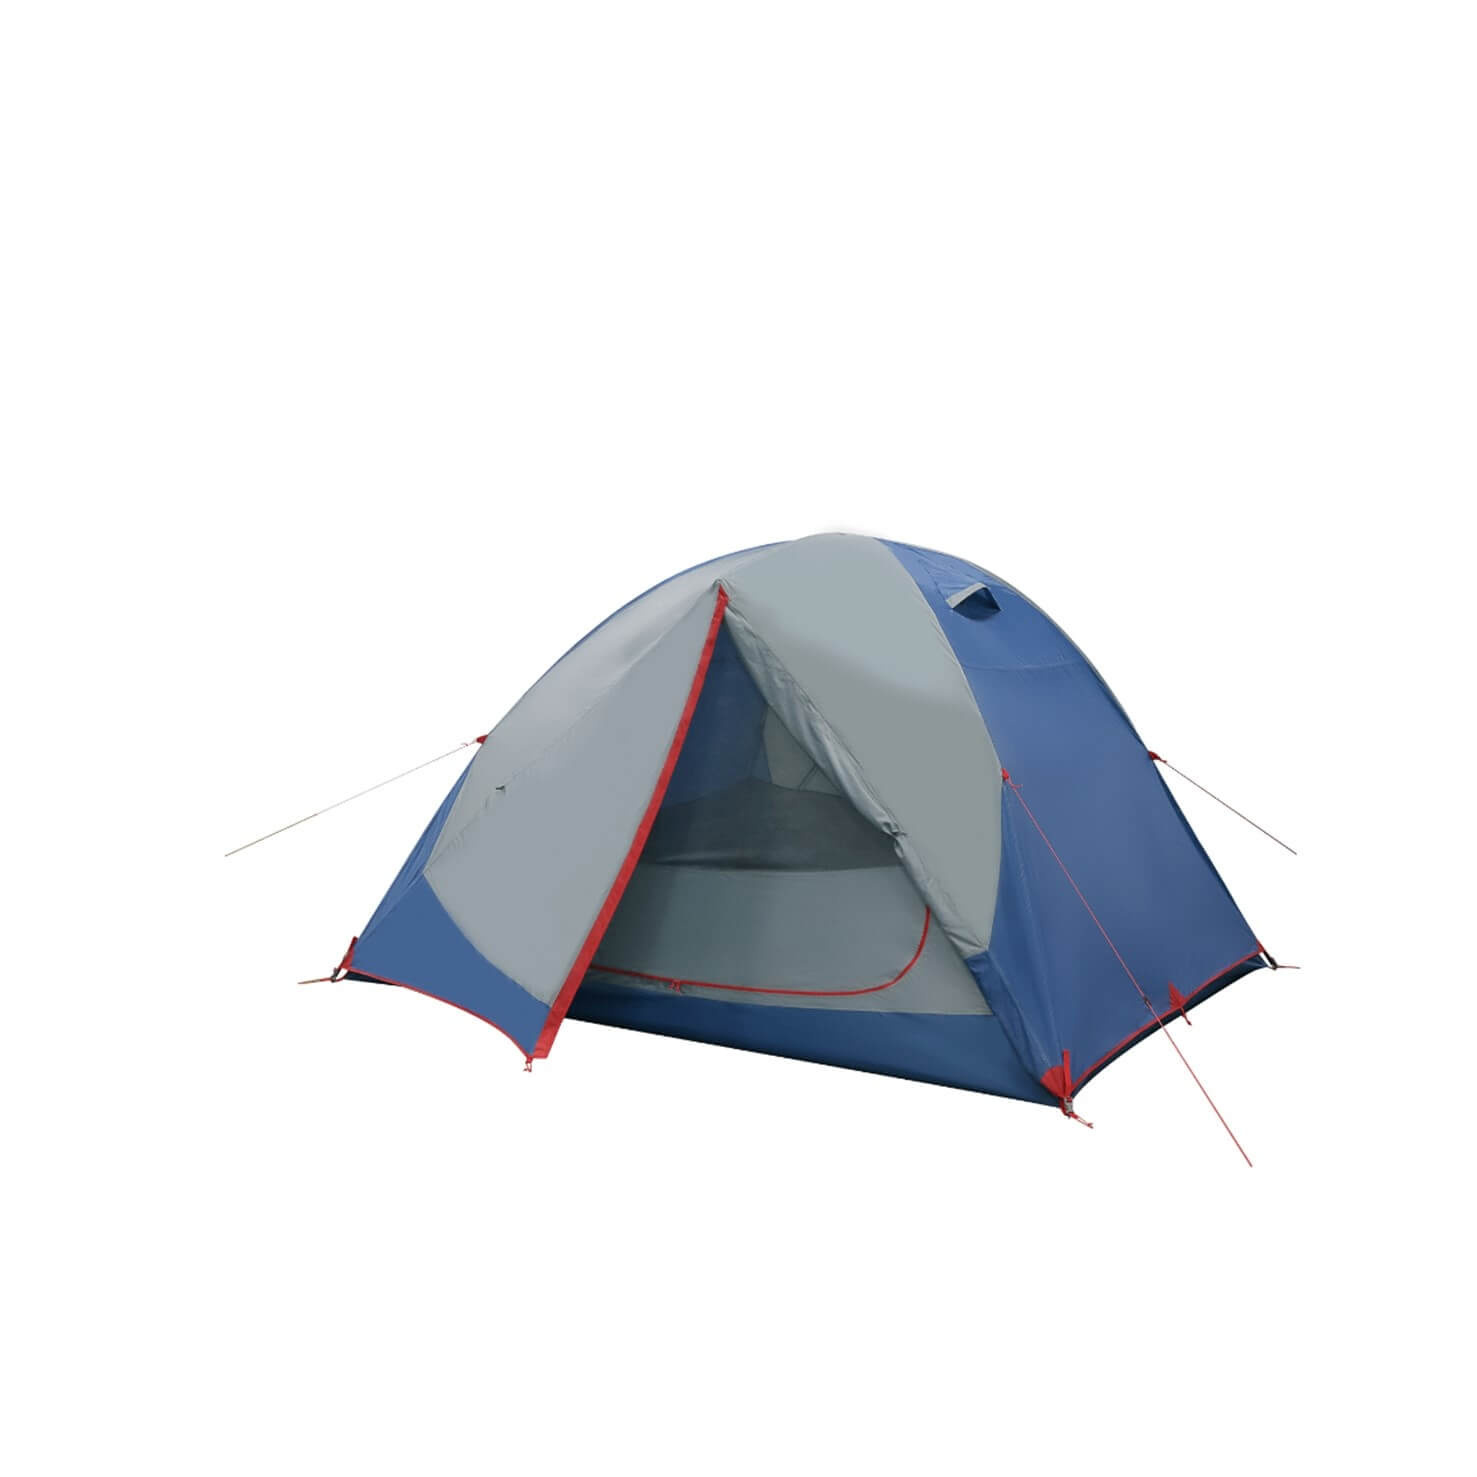 Canadian Shield 6 Person Fully Fly Tent